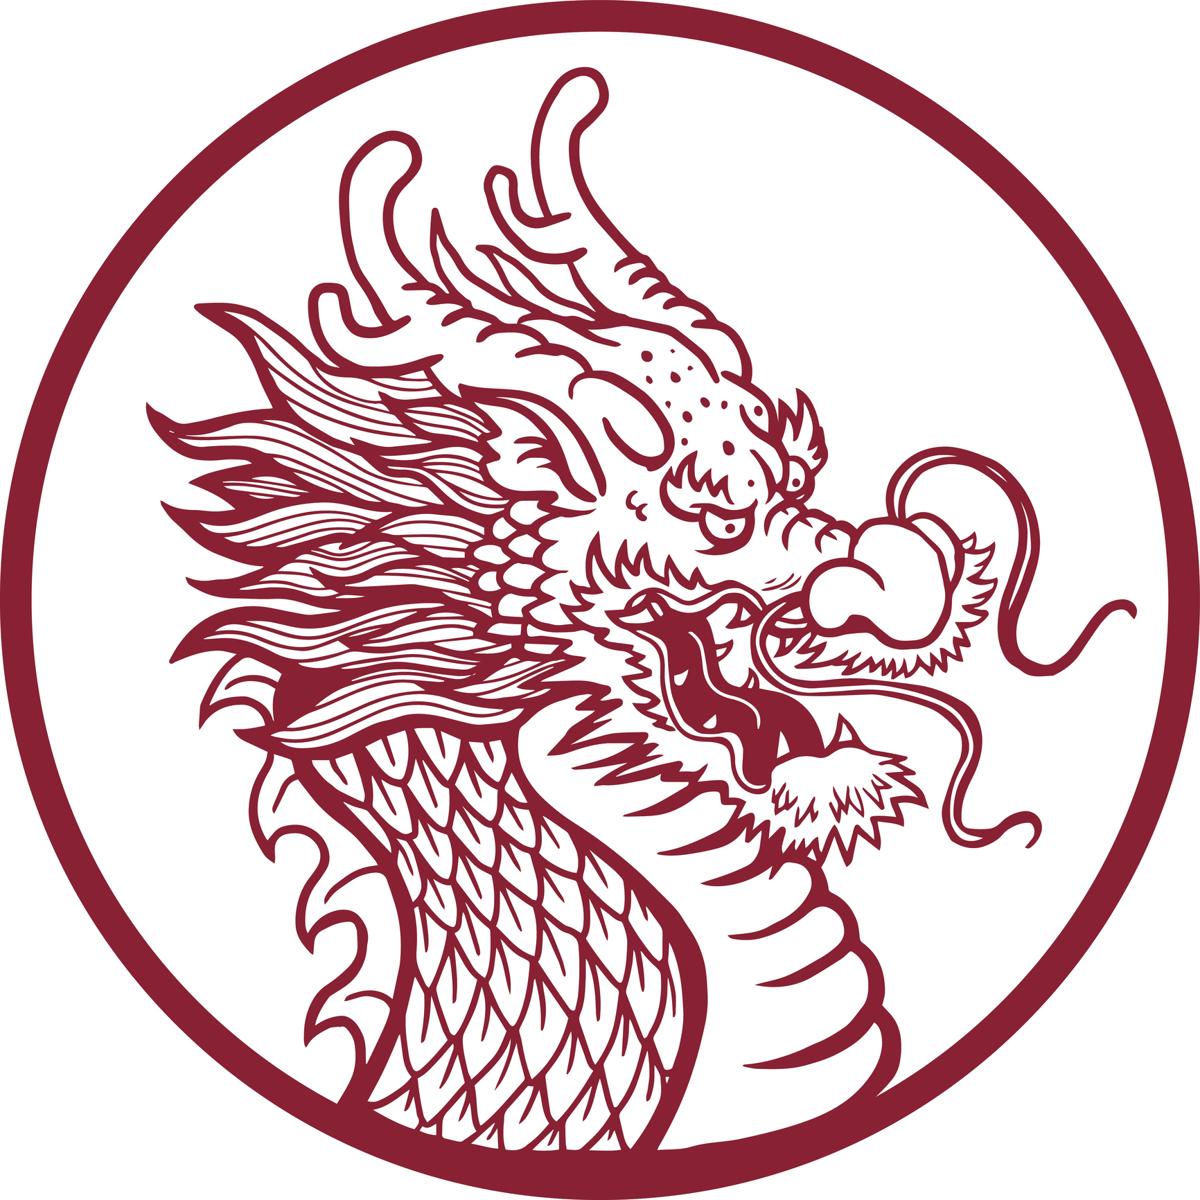 Chinese Blue Dragon Logo - Symbolism of the Mystical Blue Dragon in Chinese Astrology